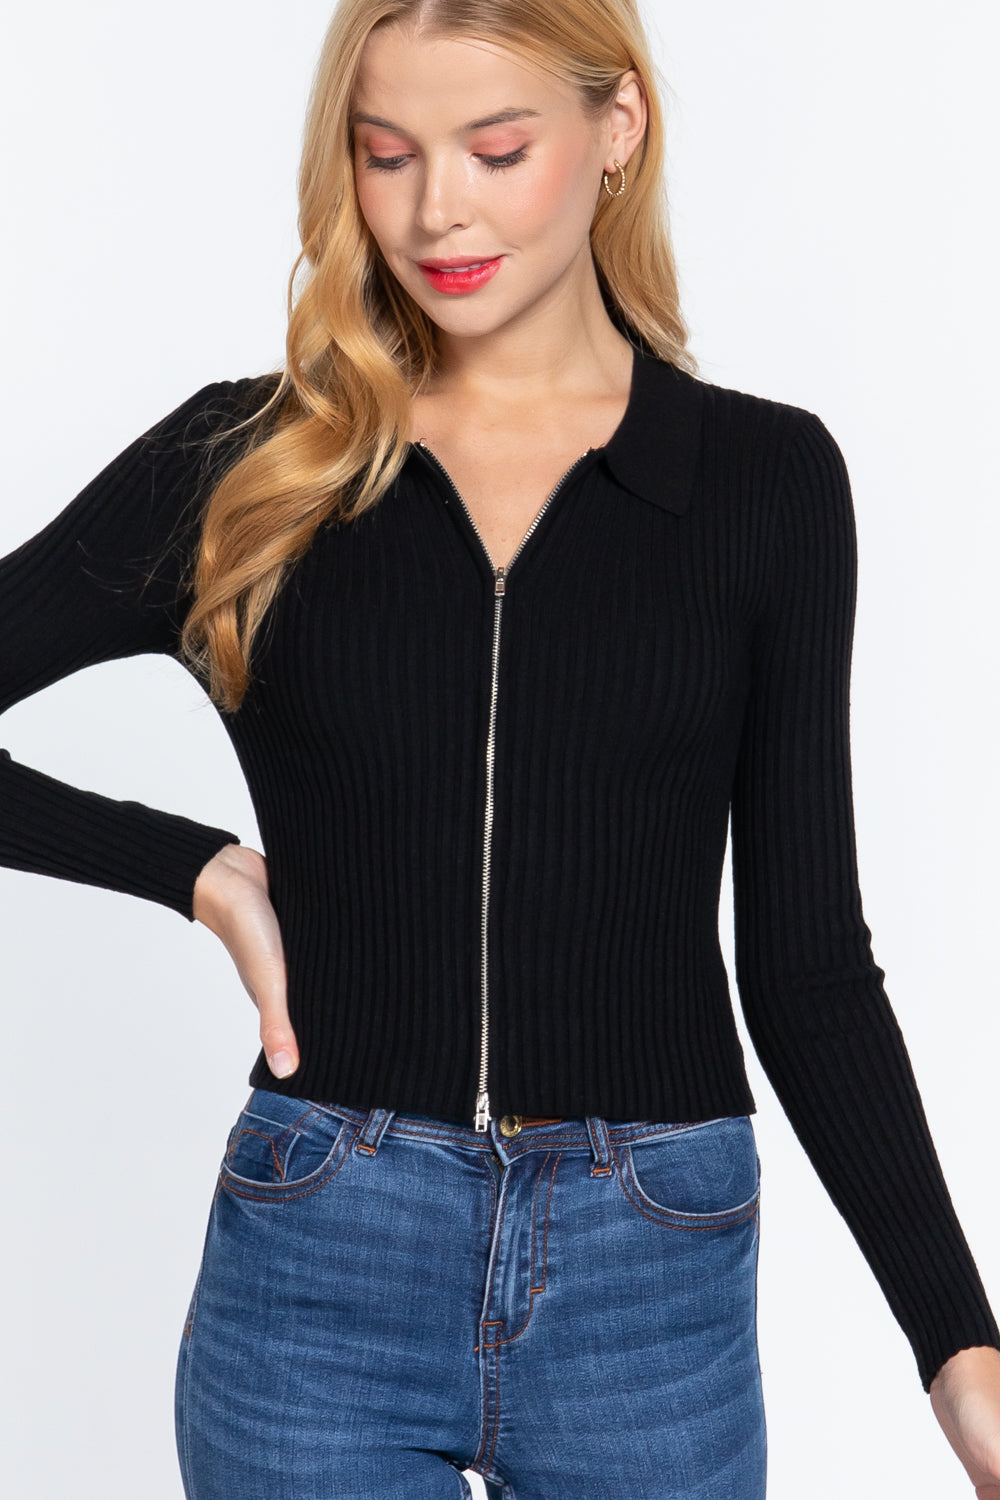 Black Notched Collar Front Zip Long Sleeve Slim Fit Stretchy Knit Sweater Top_ Shirts & Tops jehouze 